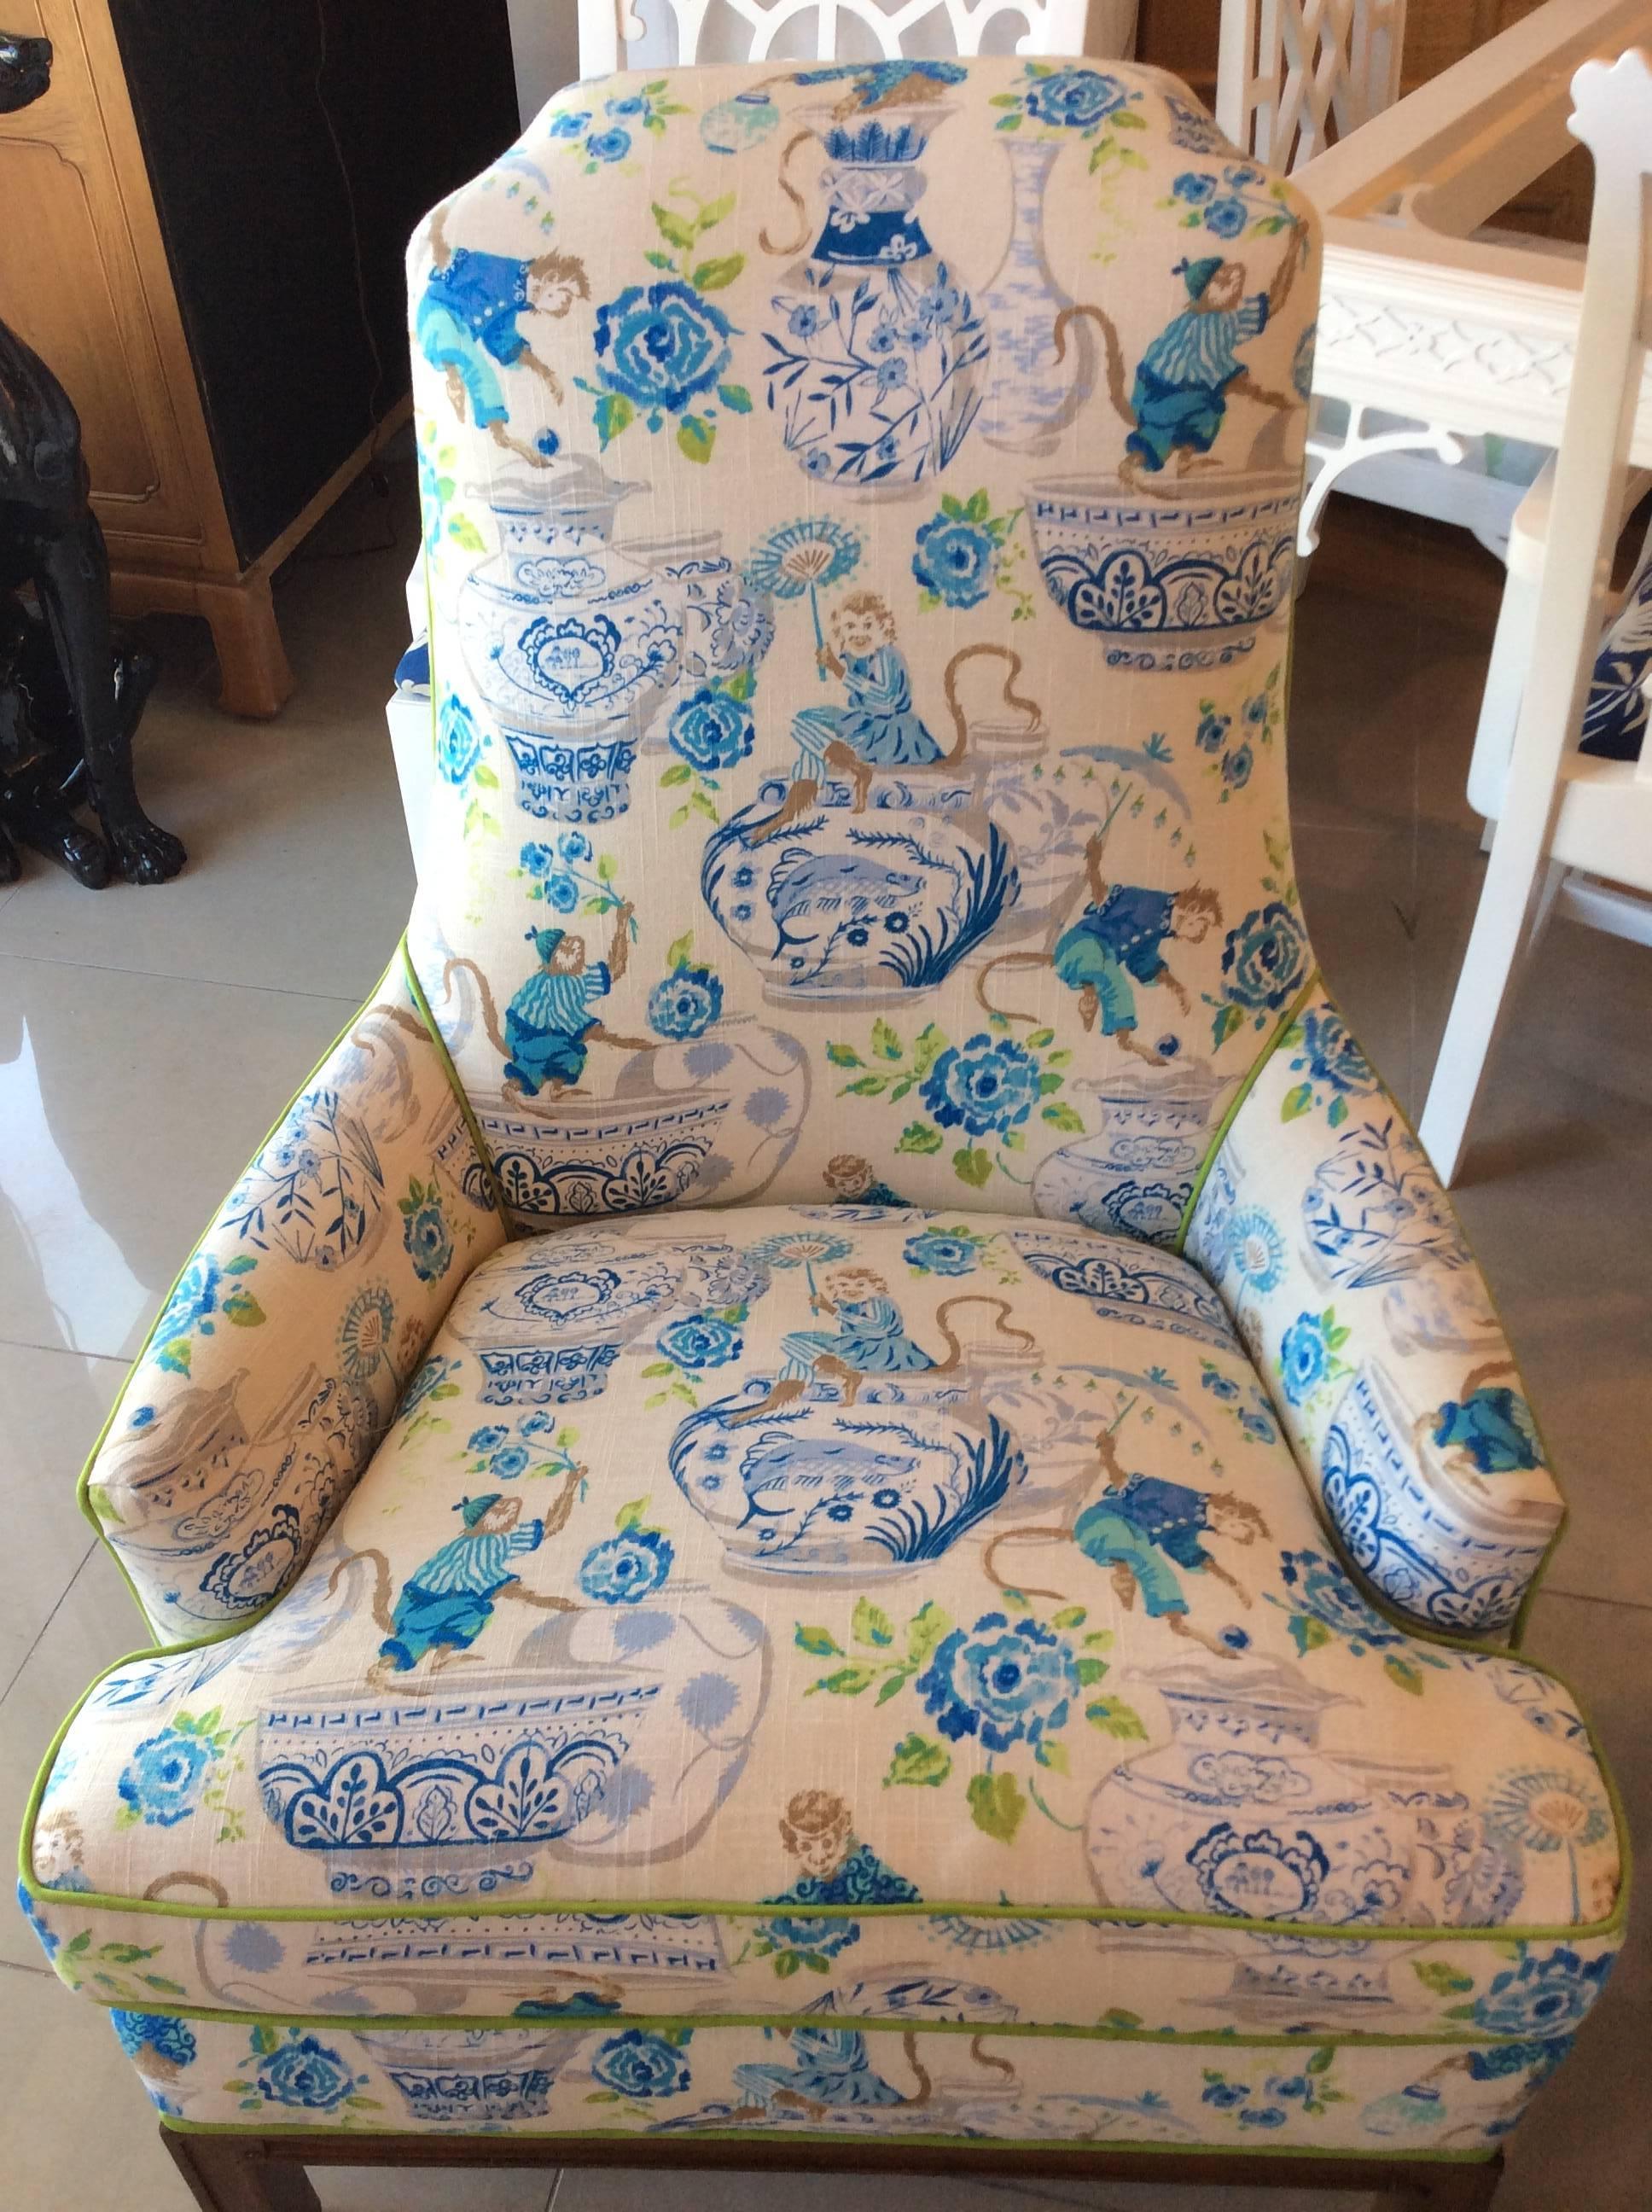 Amazing pair of vintage Mid-Century Modern armchairs, club, lounge, barrel back with wood base. Newly upholstered and cushioned with a great linen chinoiserie fabric with monkeys, blue and white ginger chairs, all piped in a coordinating green trim.